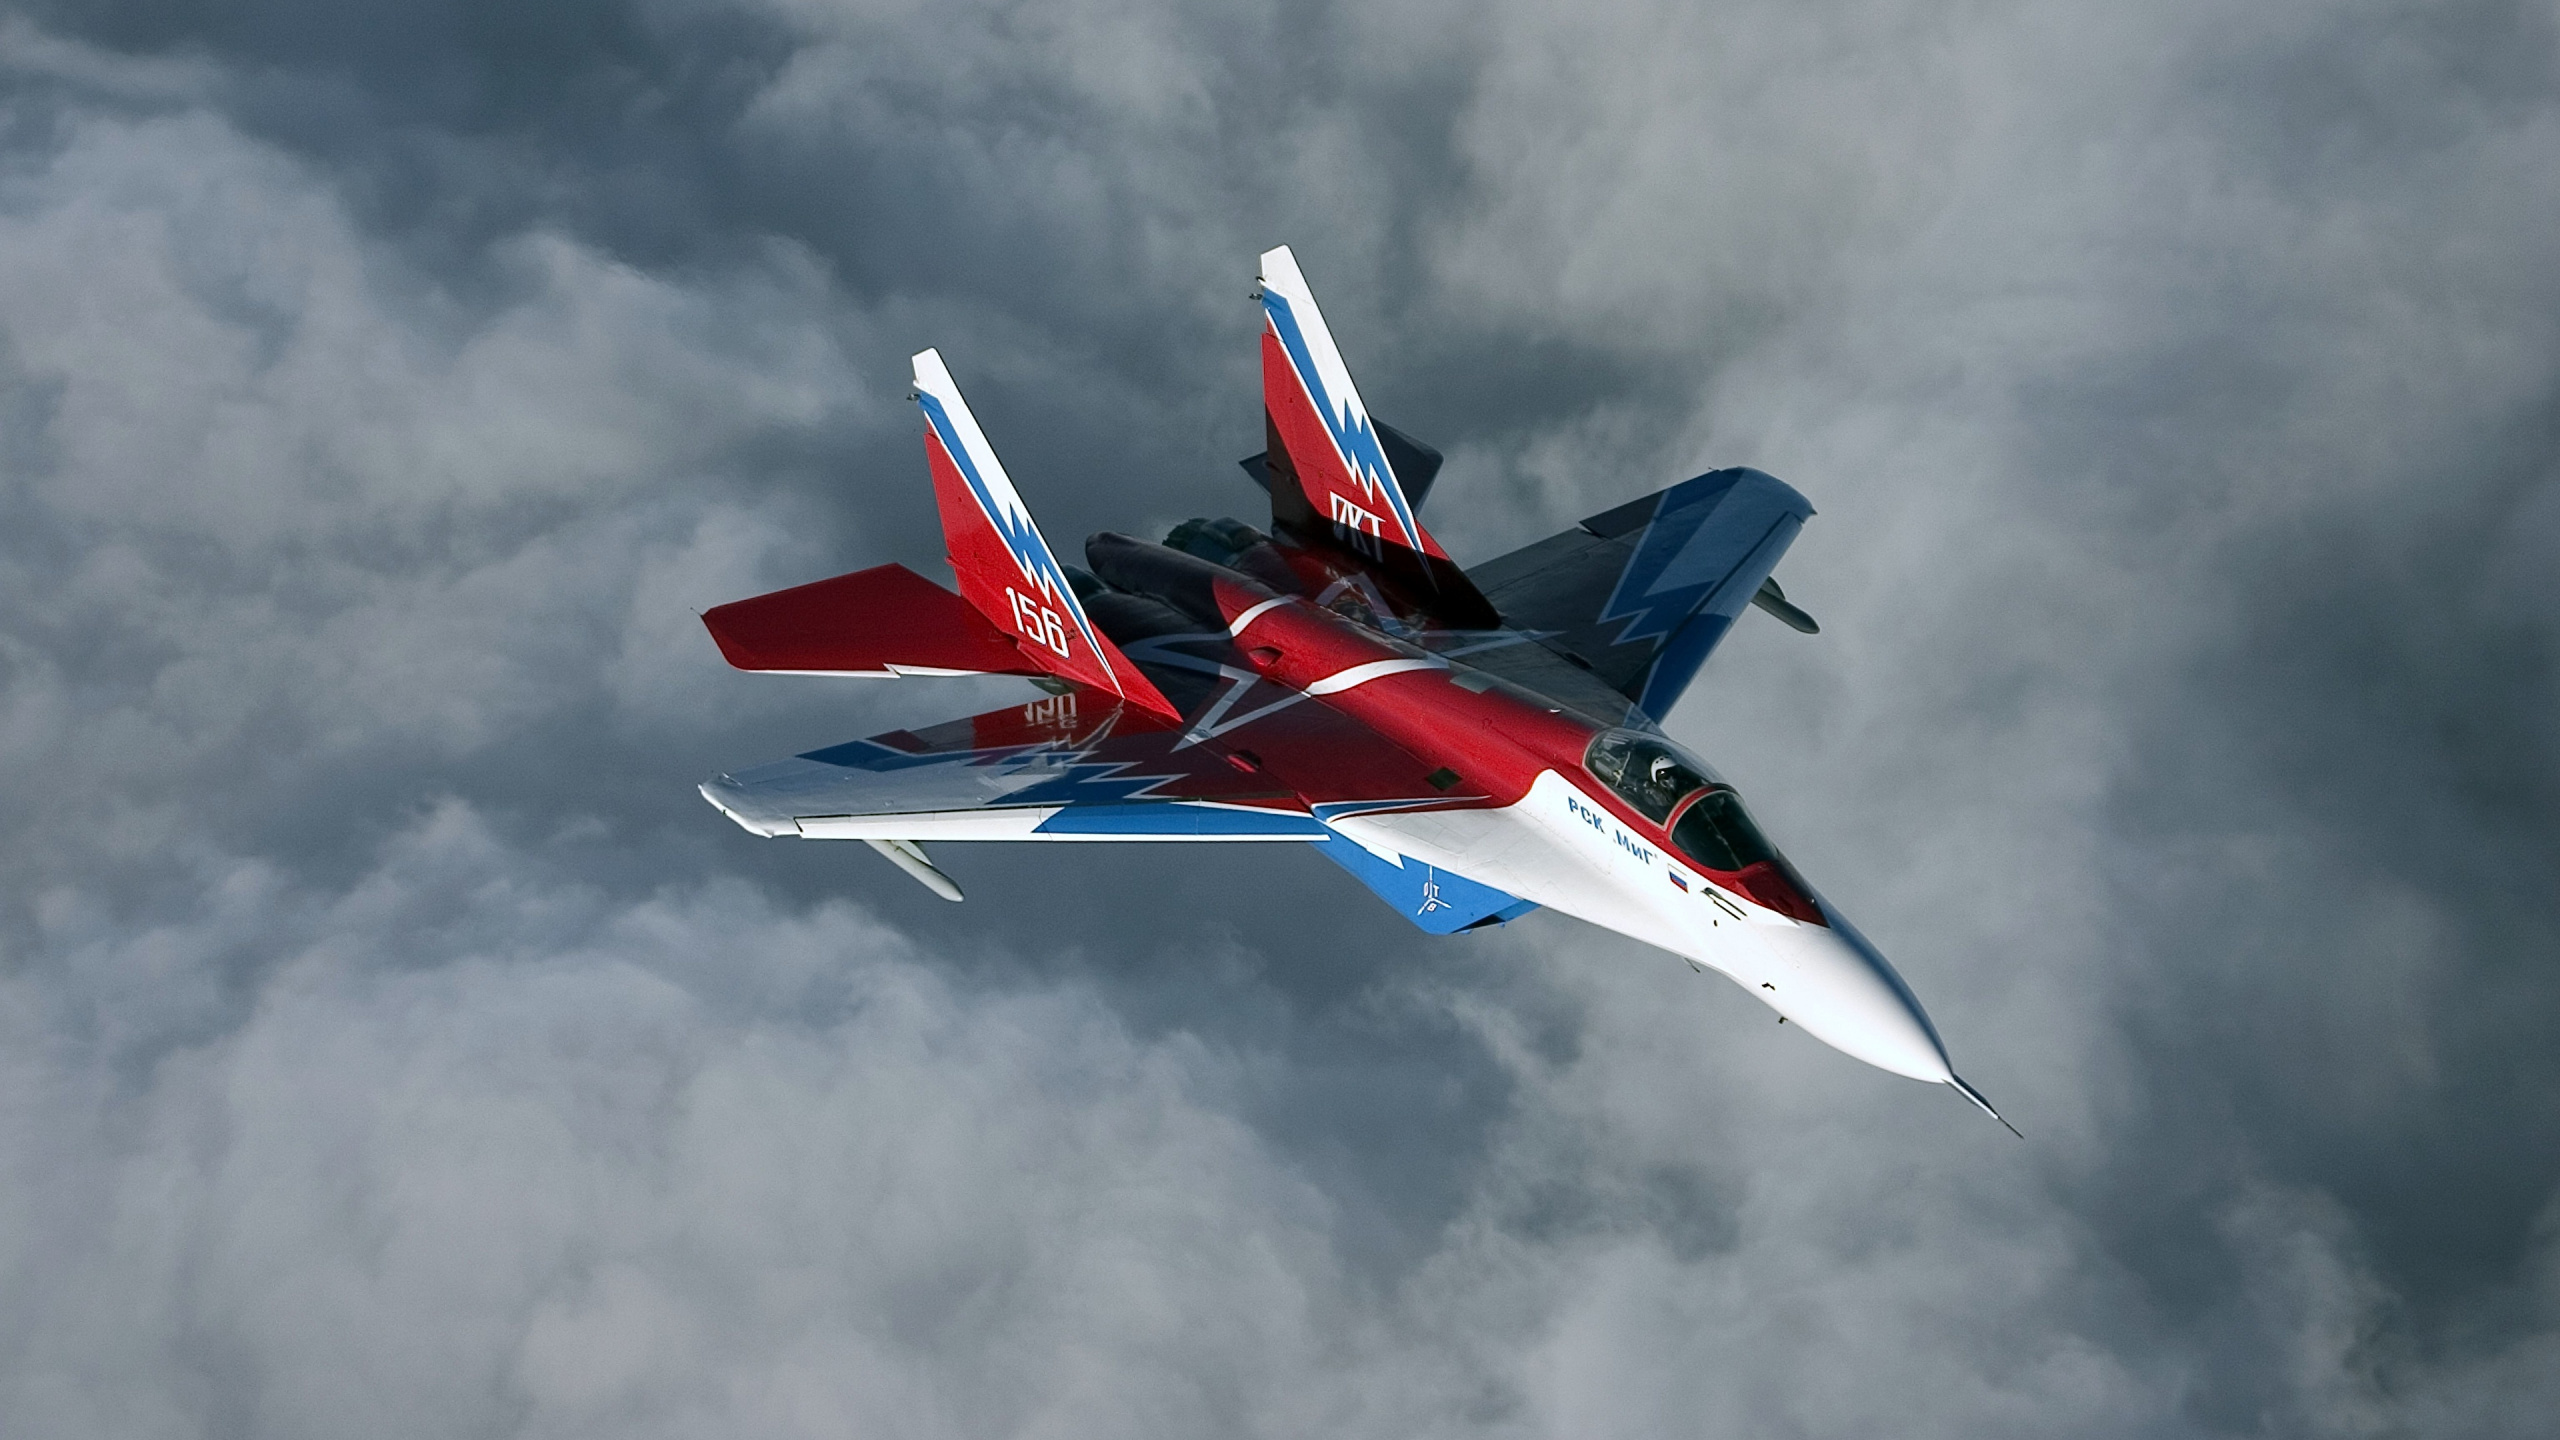 Red and White Jet Plane in Mid Air. Wallpaper in 2560x1440 Resolution